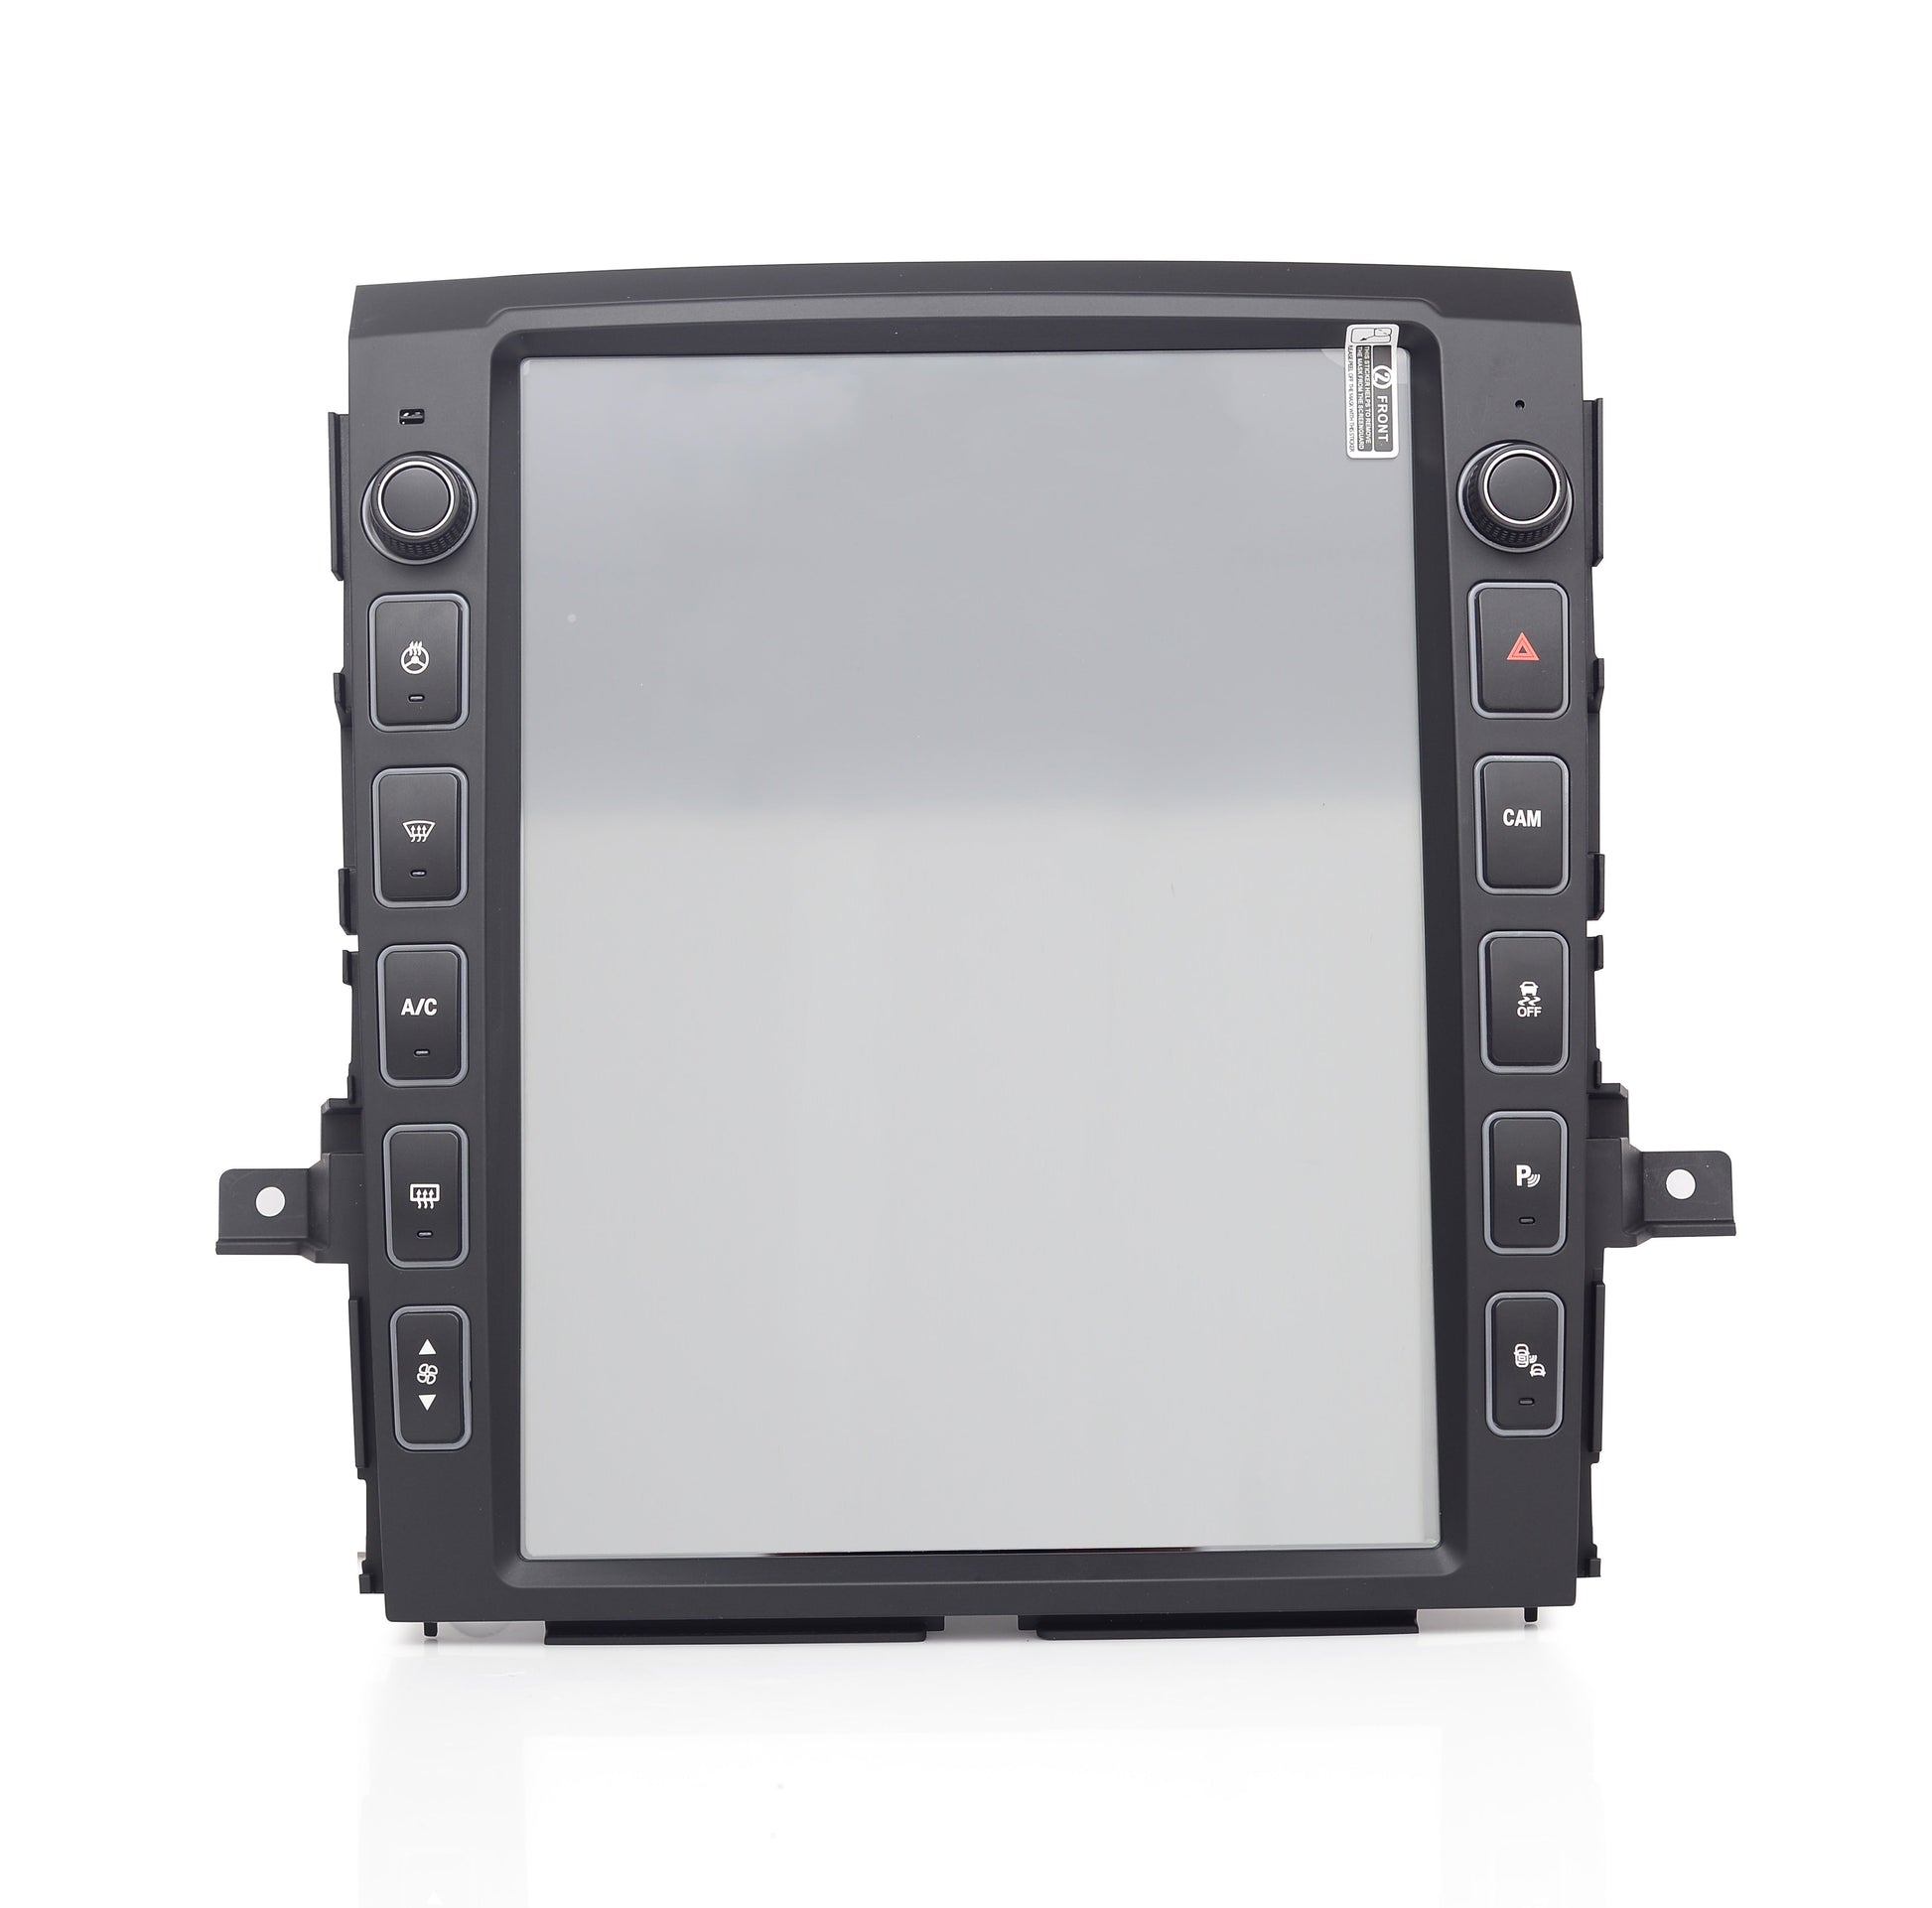 [ New ] 13” Android 12 Vertical Screen Navigation Radio for Nissan Titan (XD) 2016 - 2019-Phoenix Automotive